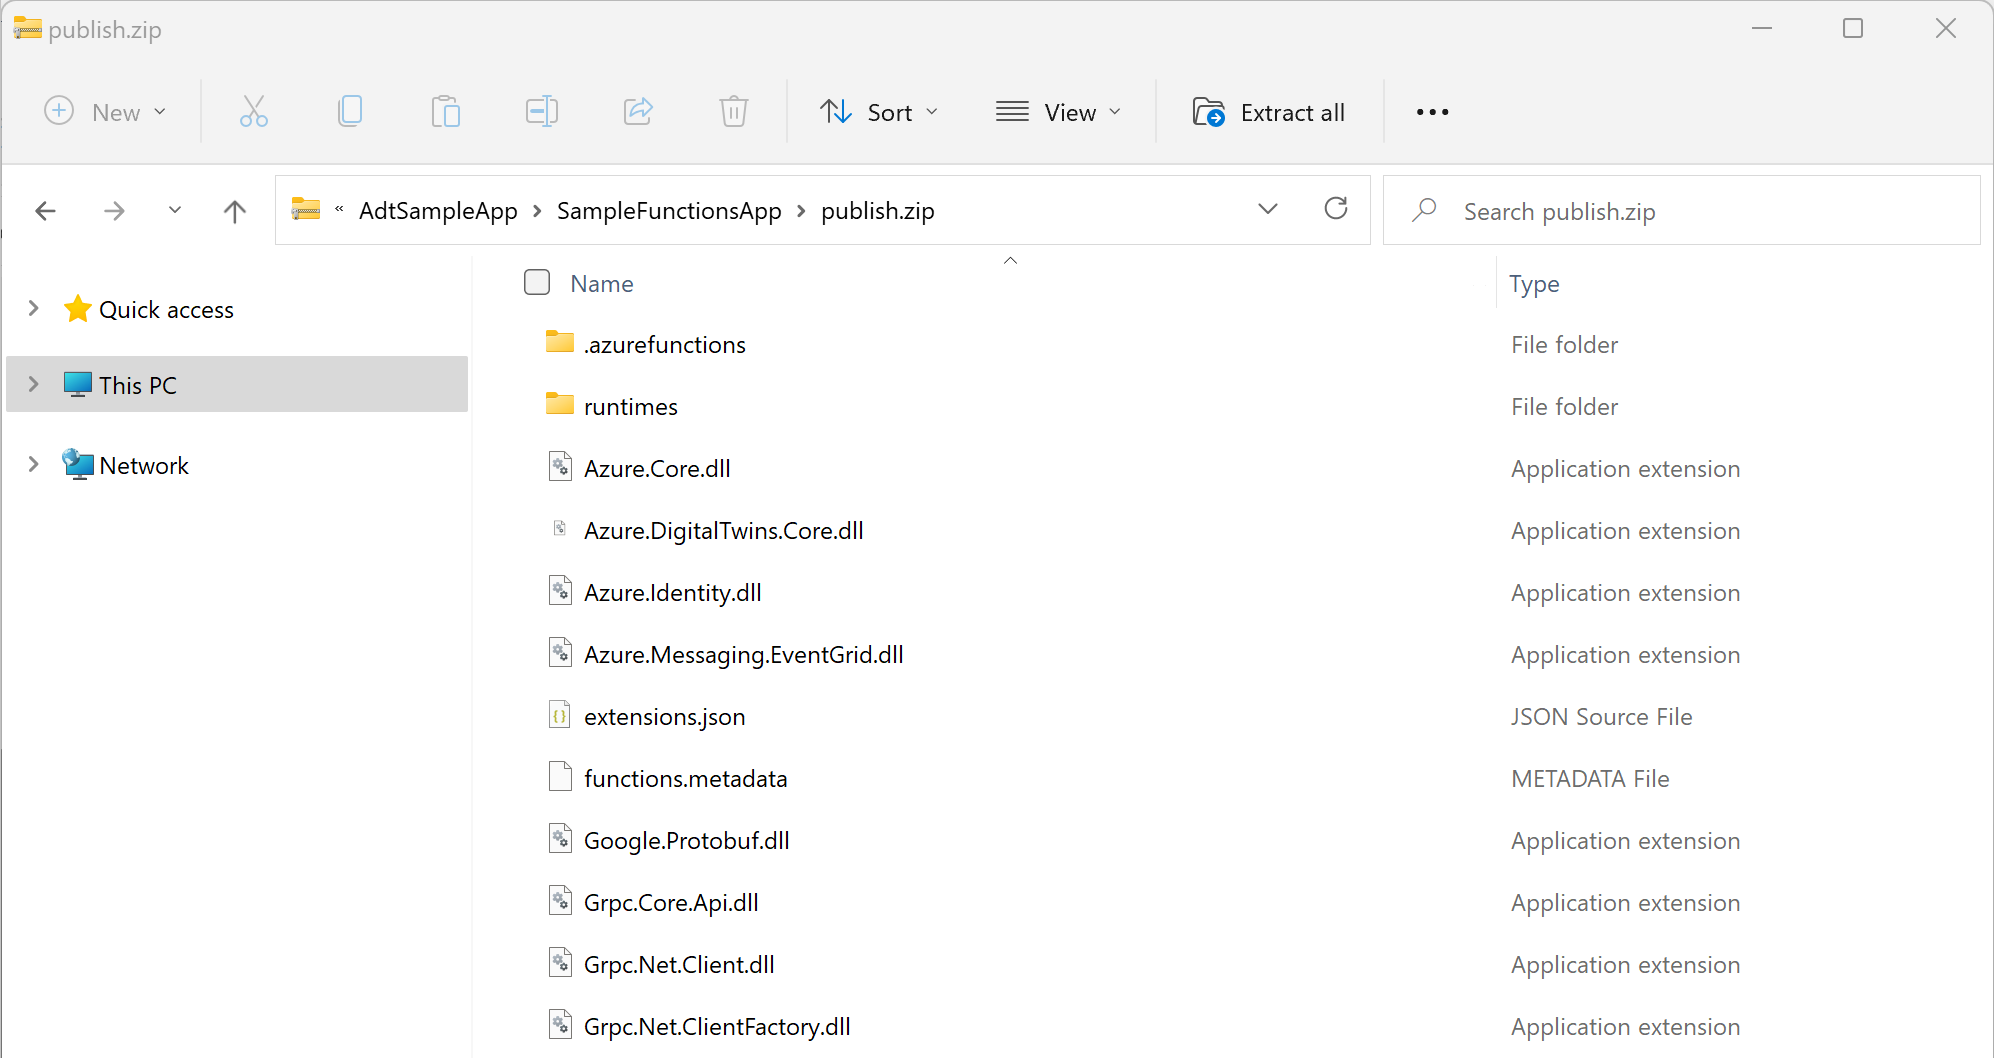 Screenshot of File Explorer in Windows showing the contents of the publish zip folder.